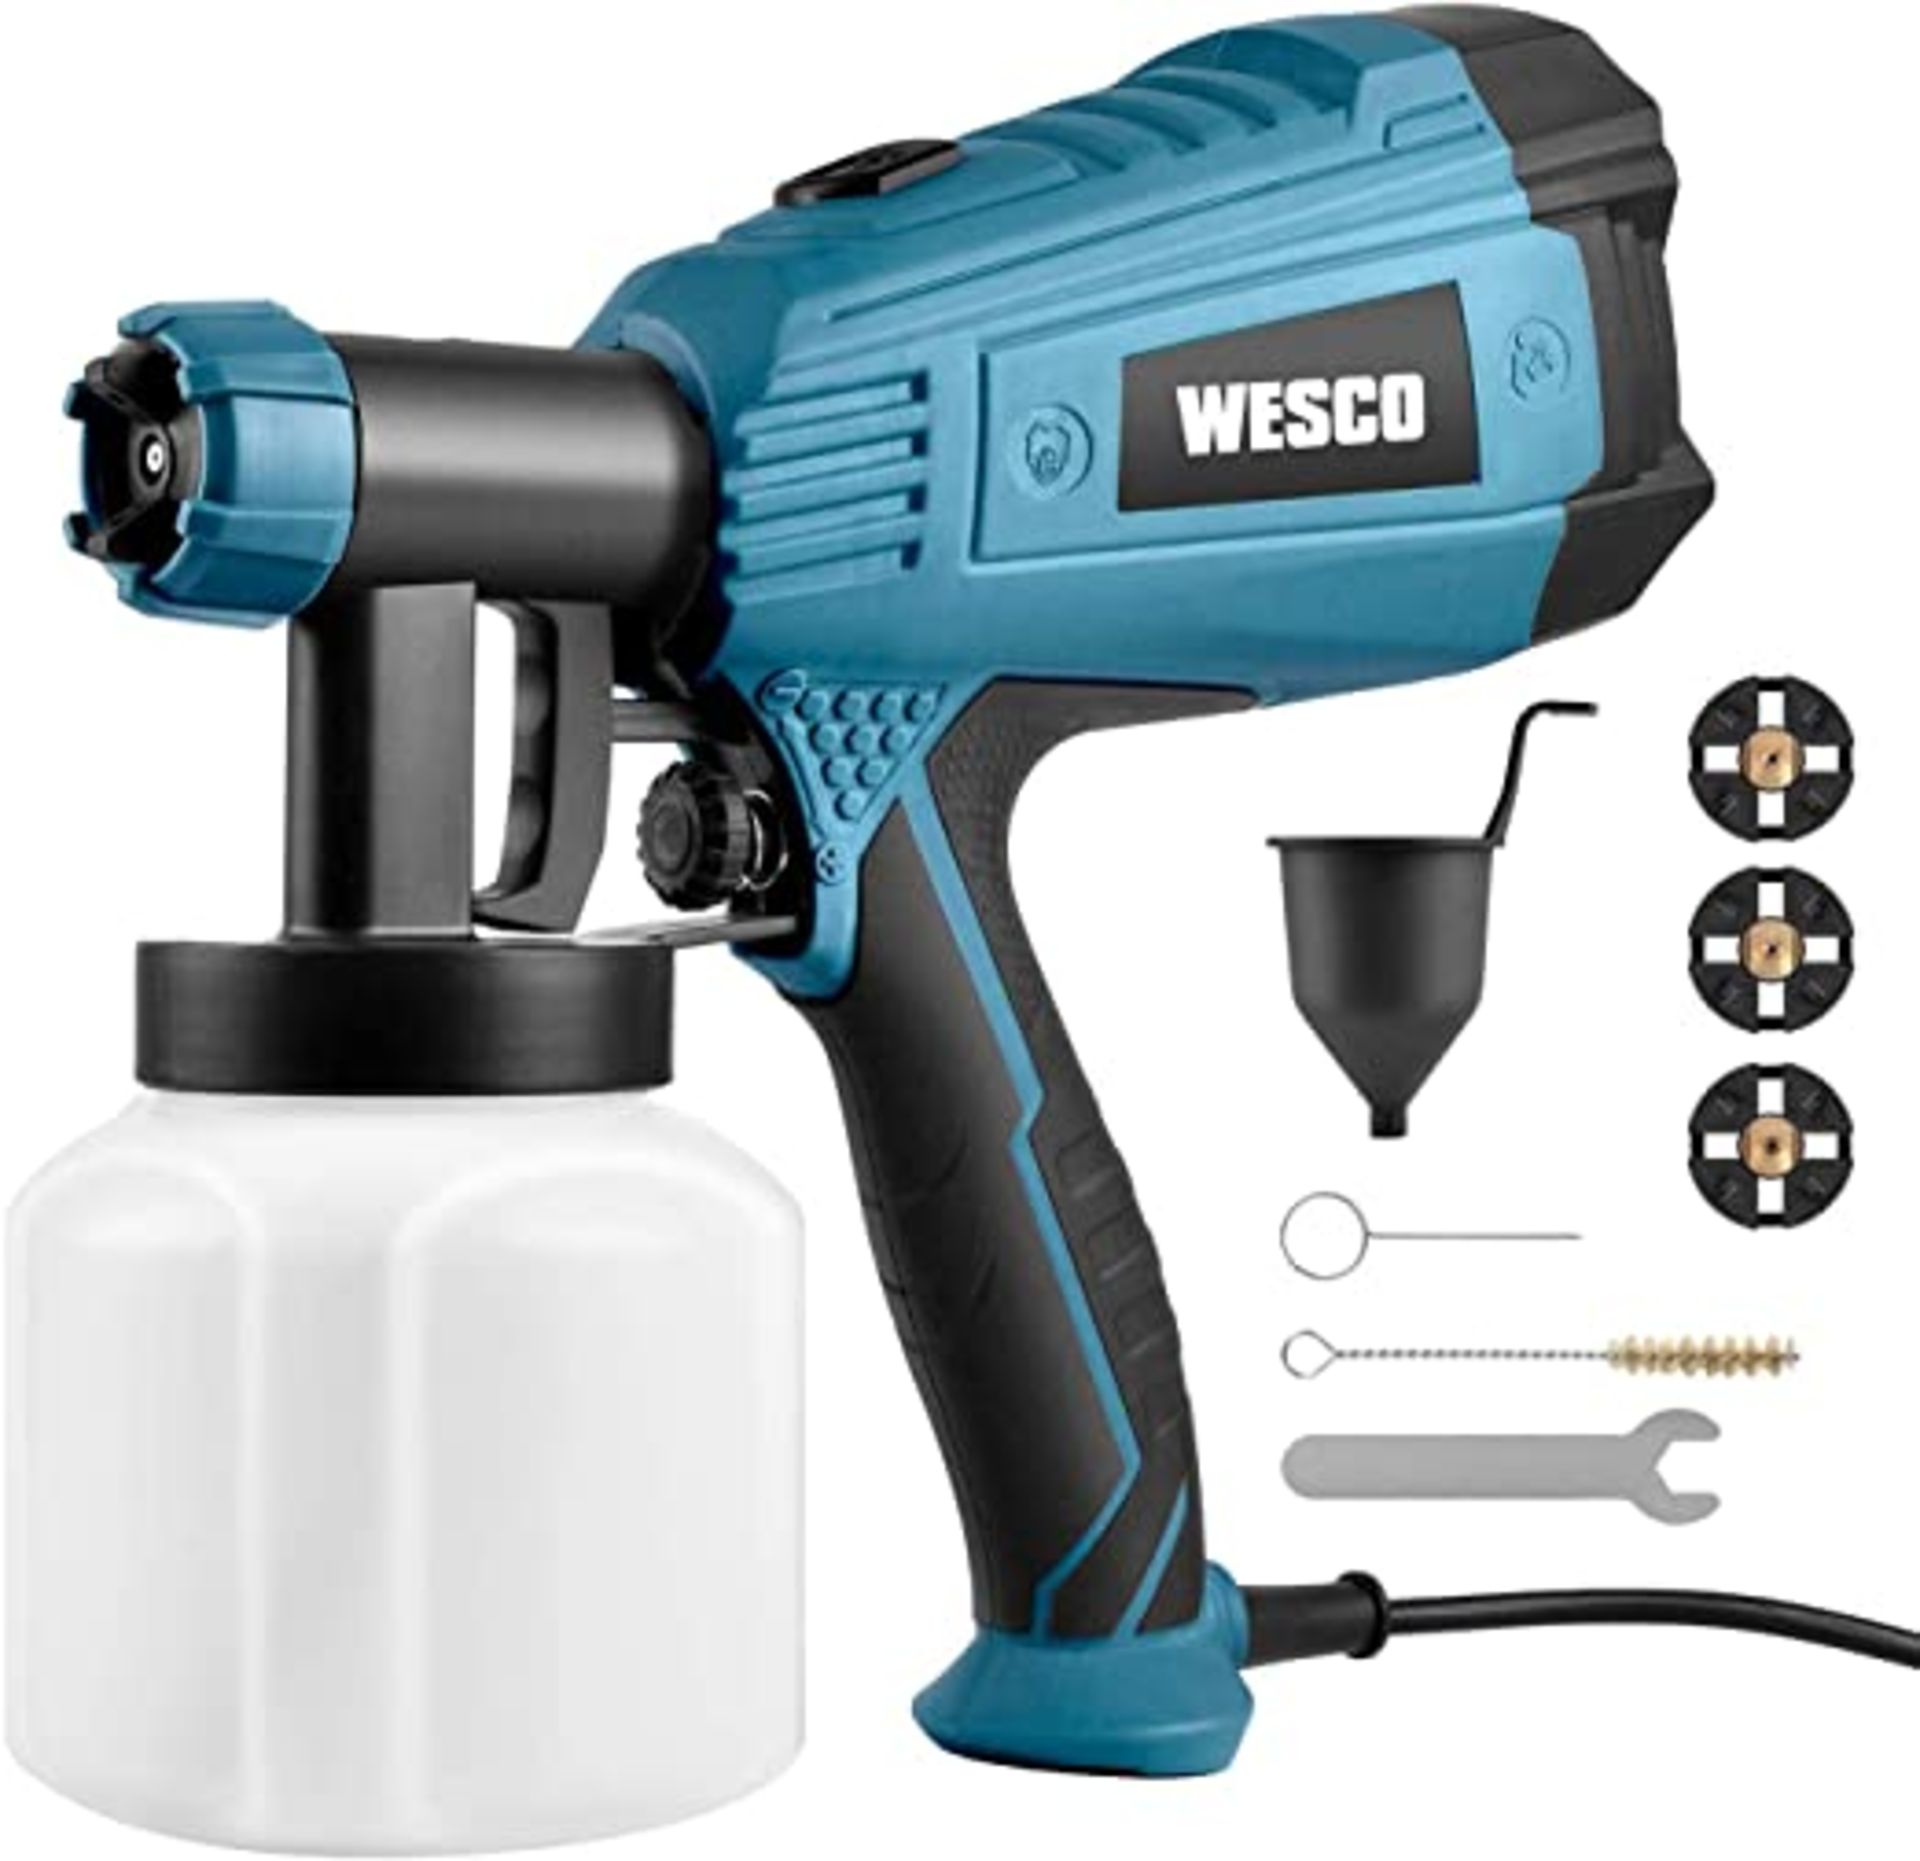 2 x NEW BOXED WESCO 500W Electric Paint Spray Gun with 3 Nozzles(1.5/1.8/2.0mm), 800ml/min Max Air